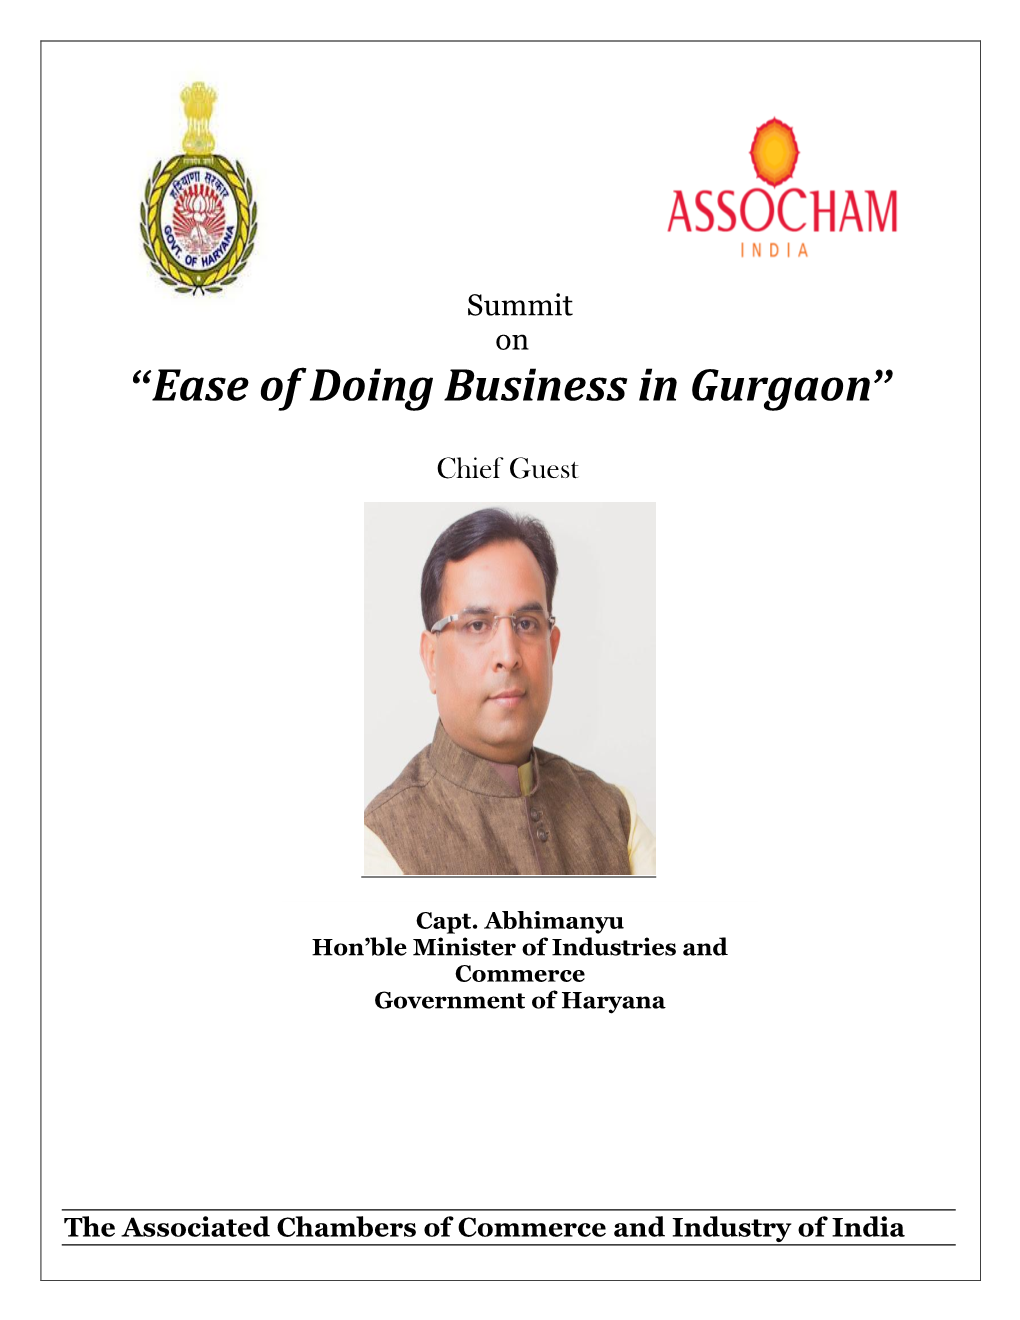 “Ease of Doing Business in Gurgaon”